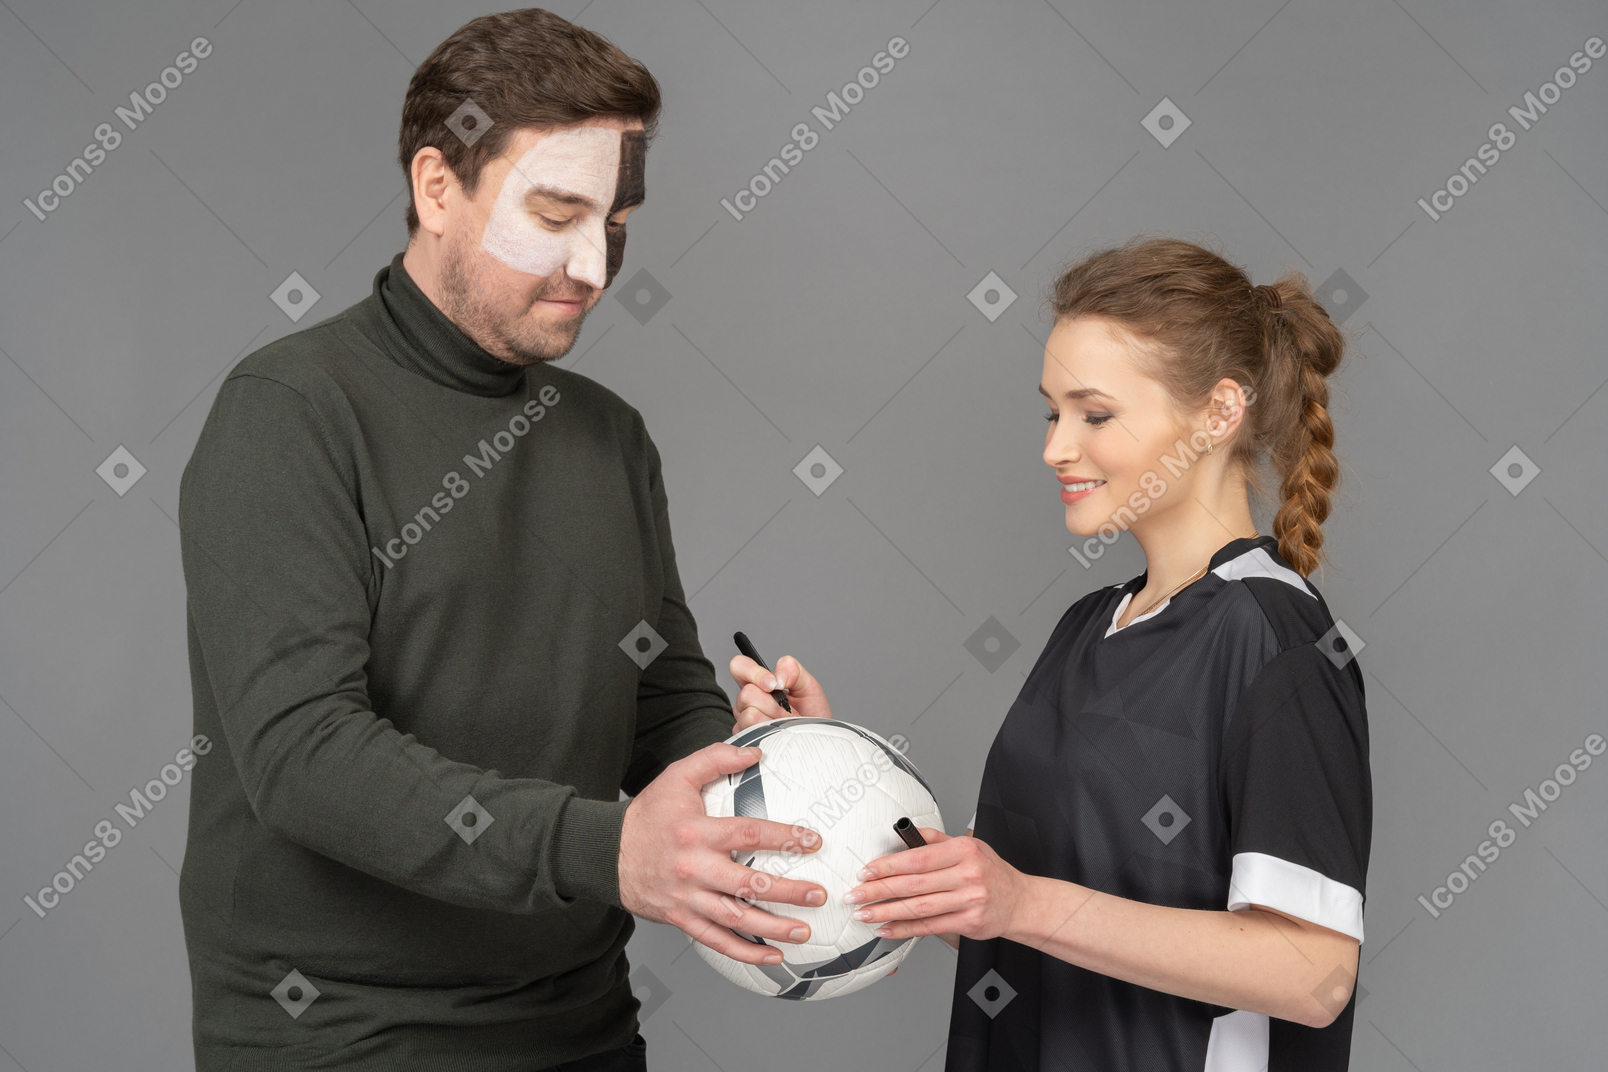 Female football player signing a ball for the fan